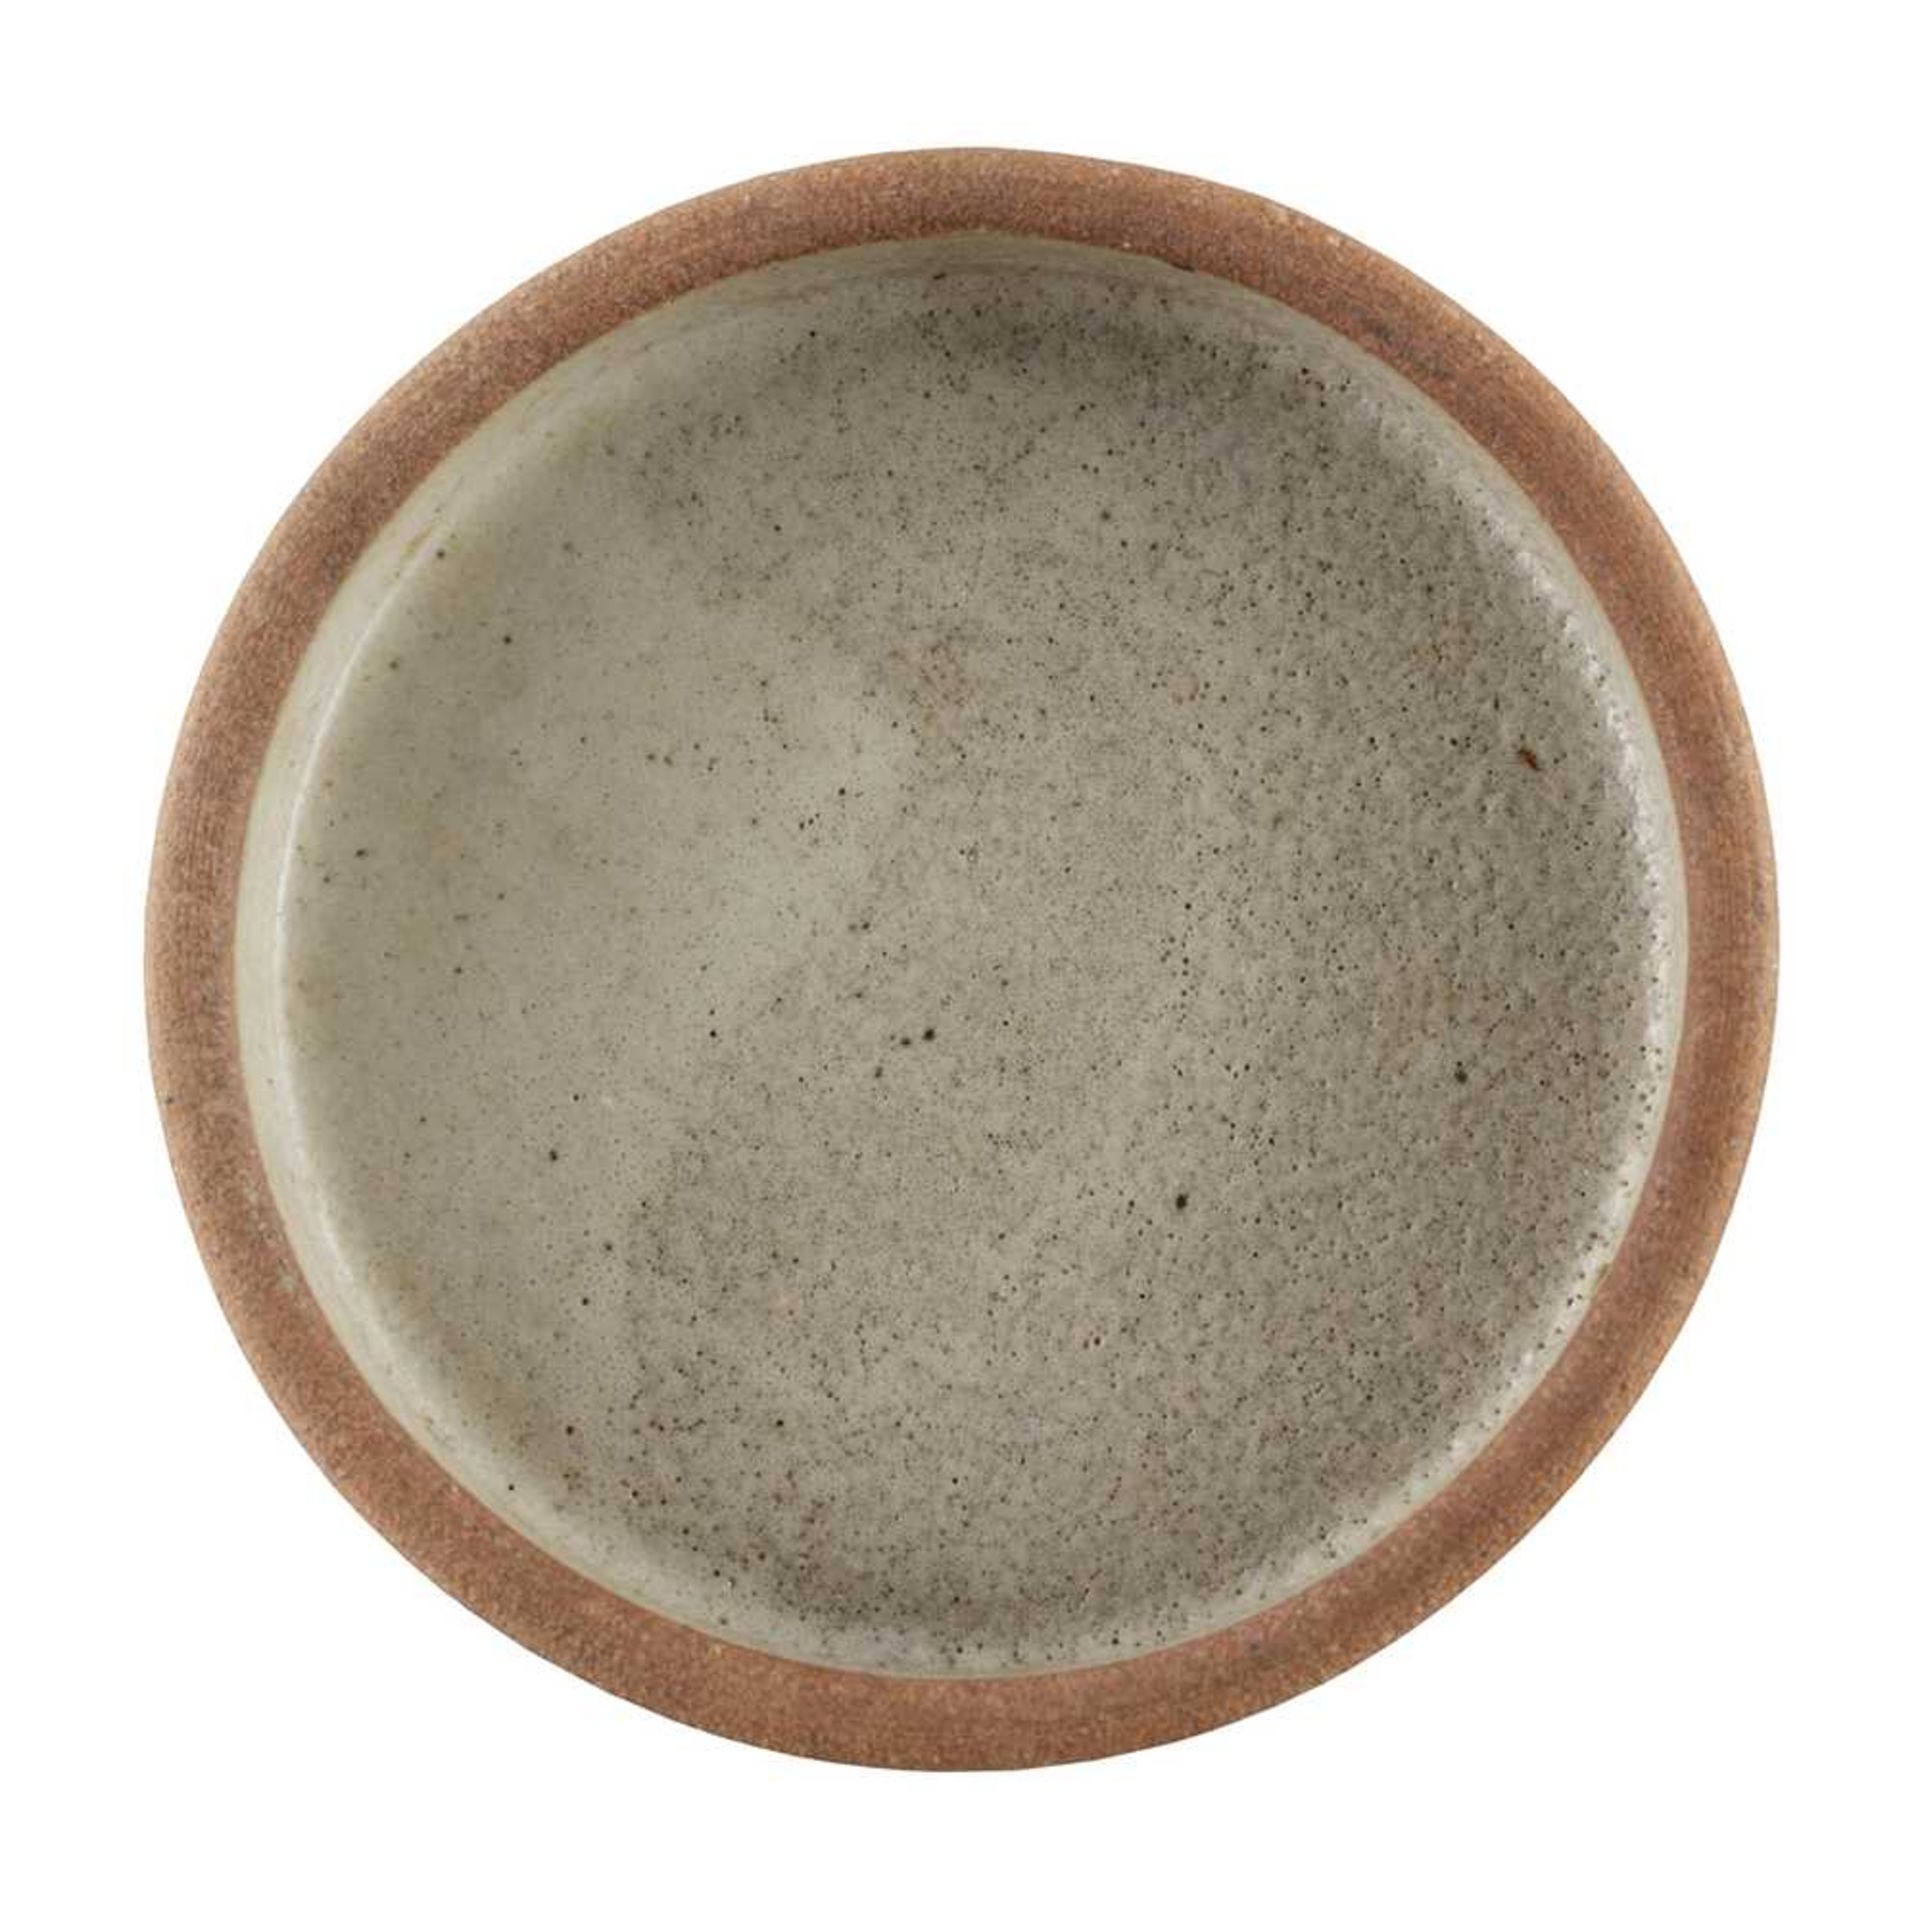 LEACH POTTERY COLLECTION OF TABLEWARE - Image 2 of 13